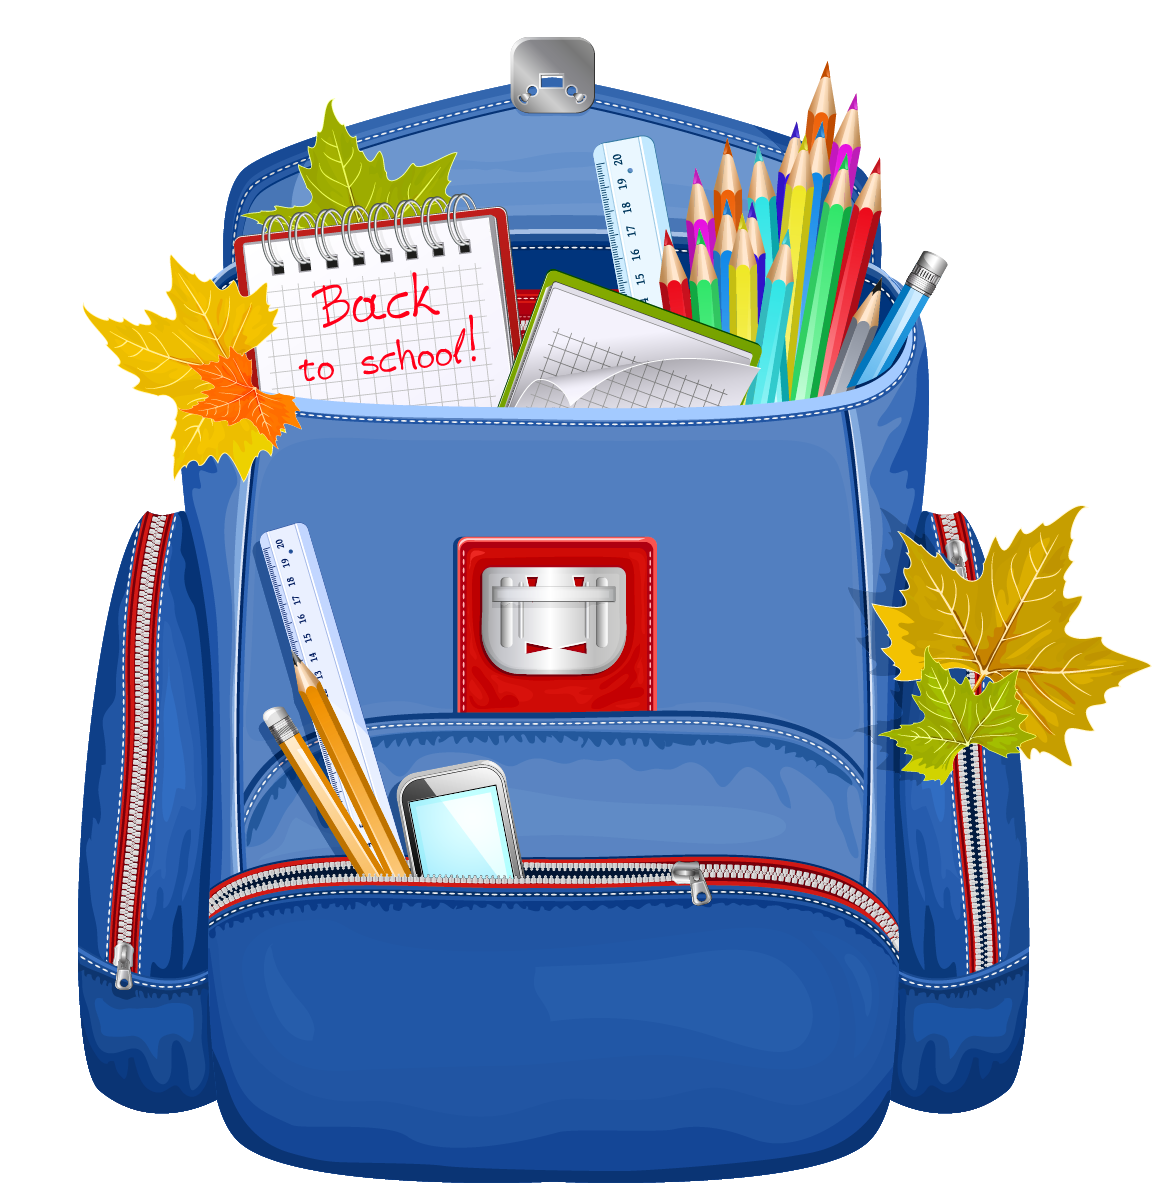 School backpack clipart free images 2 clipartwiz